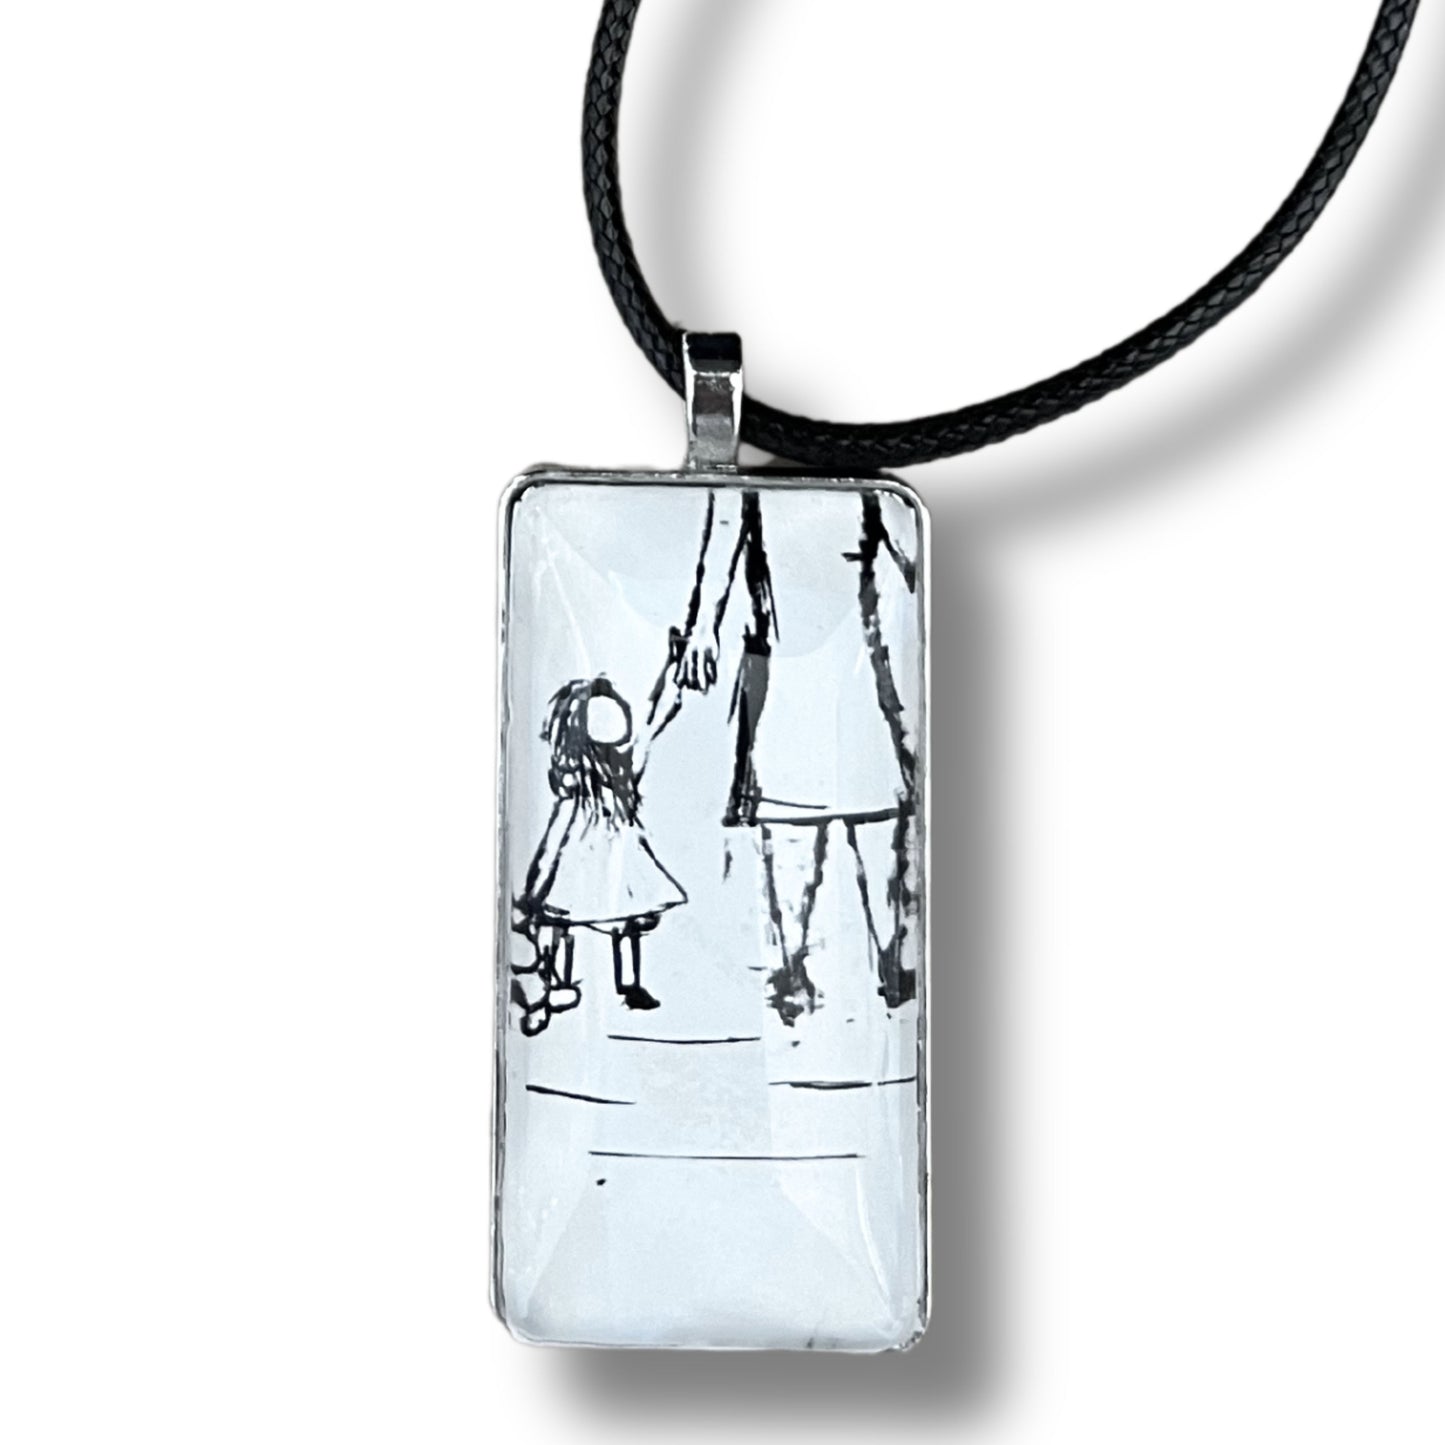 Mom Can We Go? Pendant